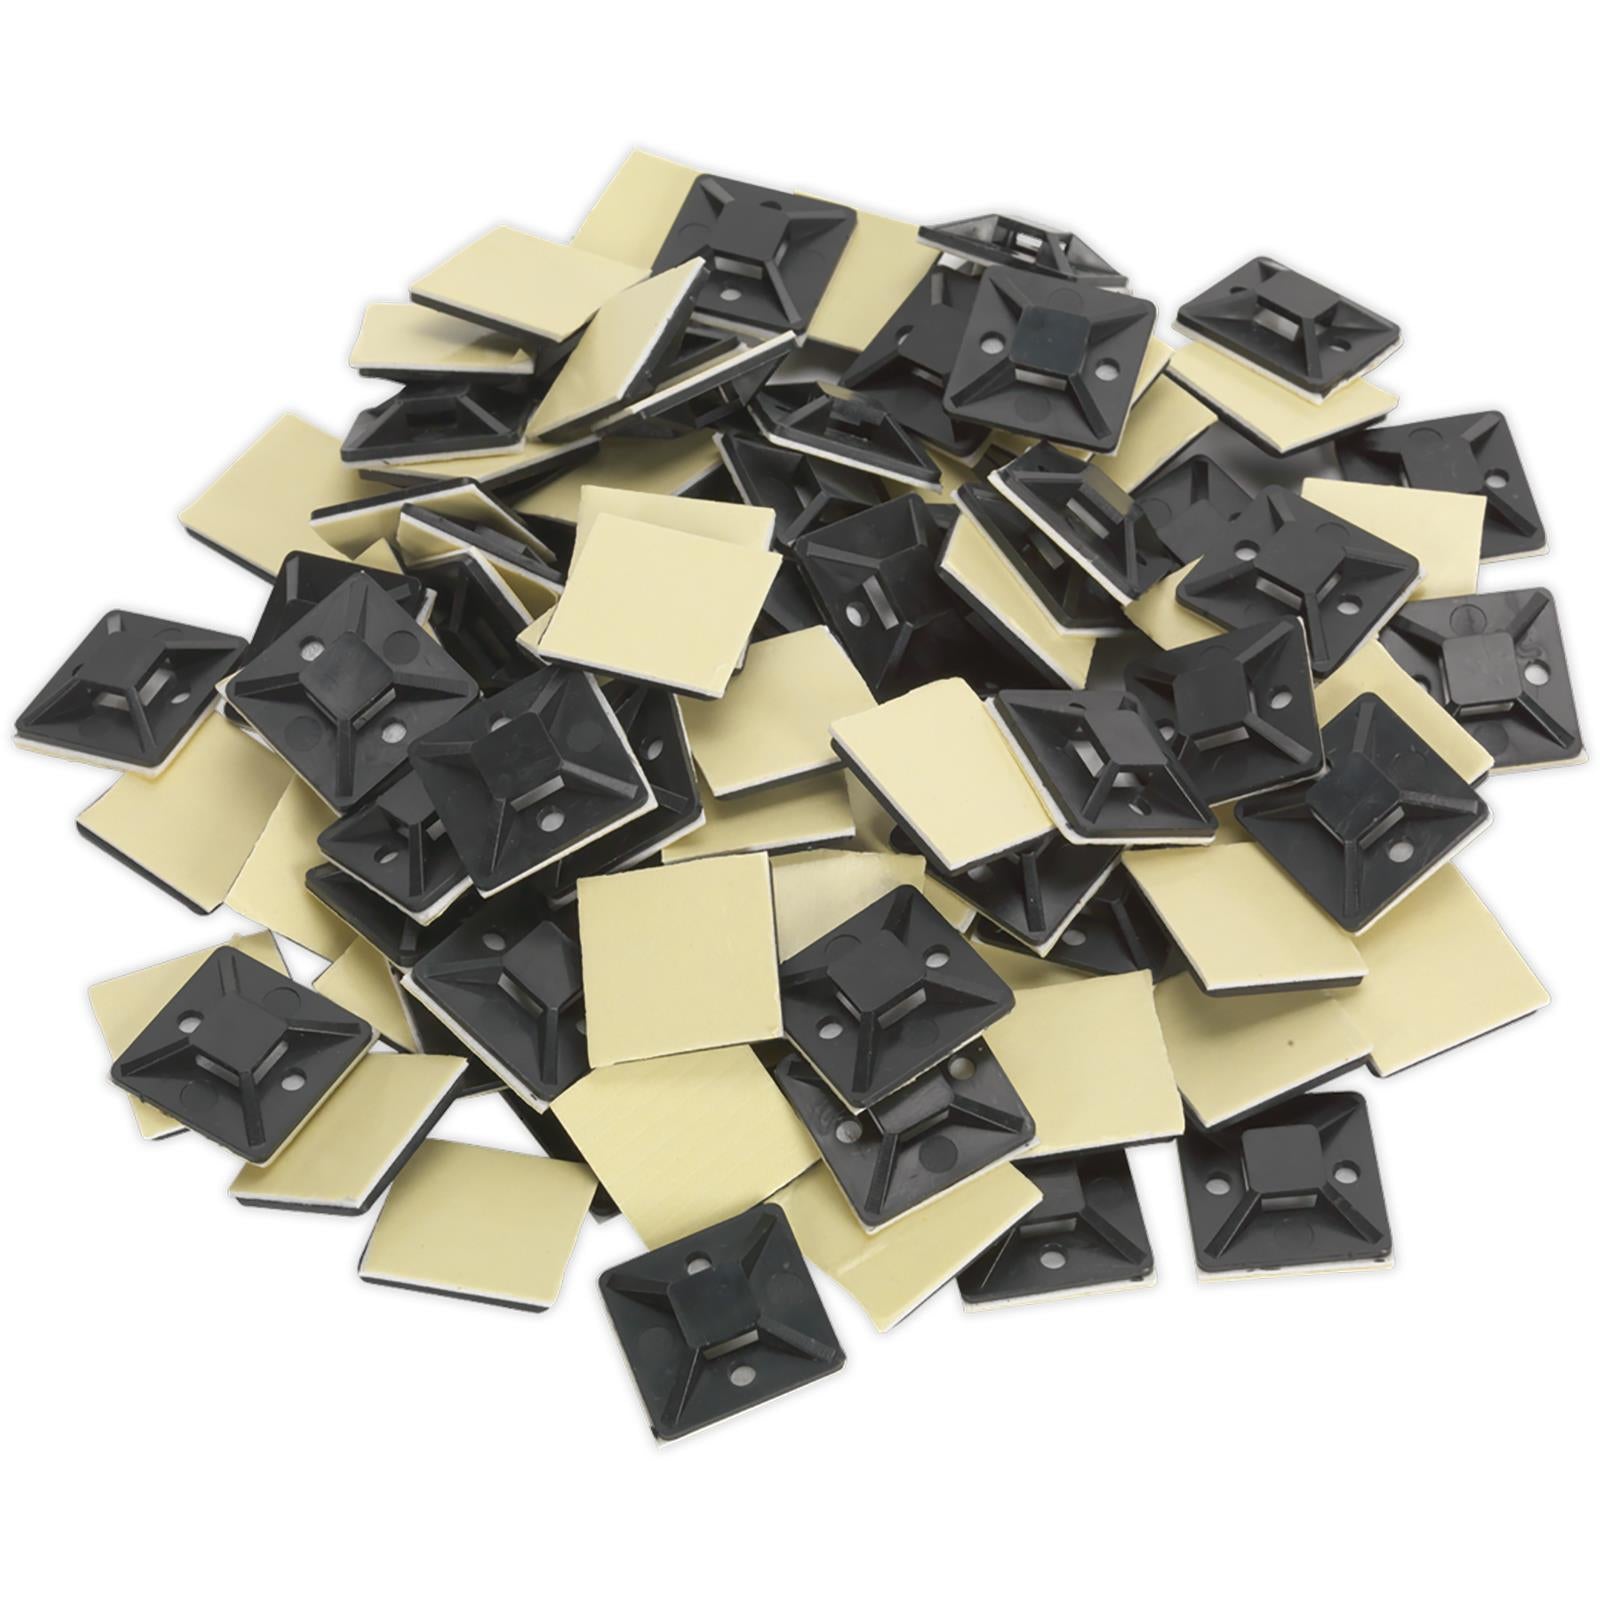 Sealey Cable Tie Mount Self Adhesive 30 x 30mm Black Pack of 100